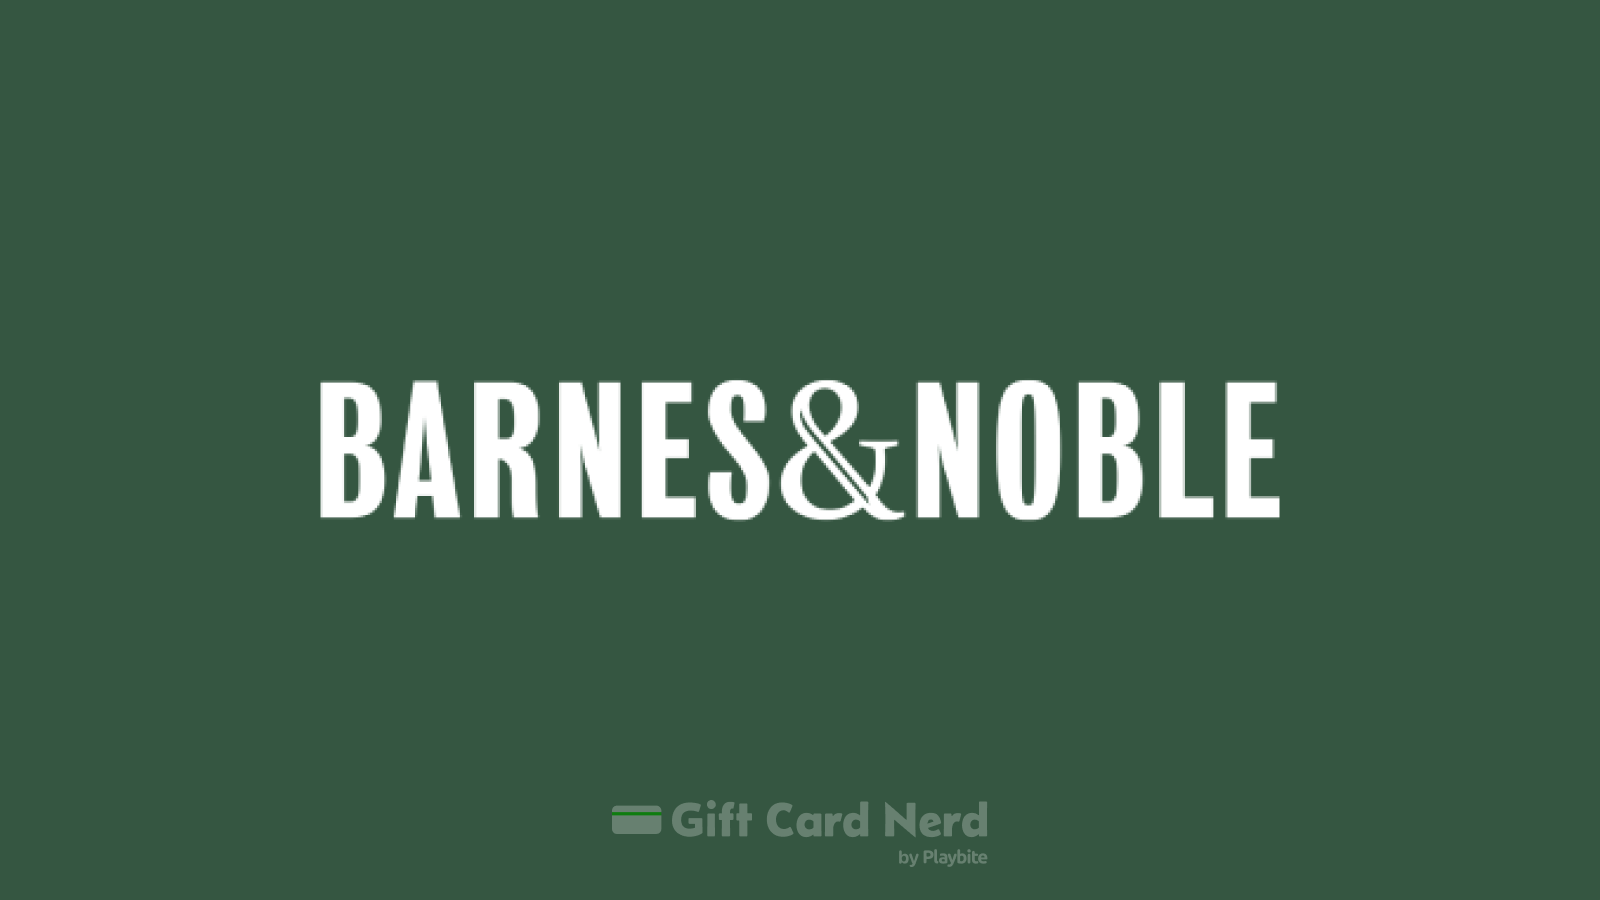 Can I Use a Barnes and Noble Gift Card on PayPal?